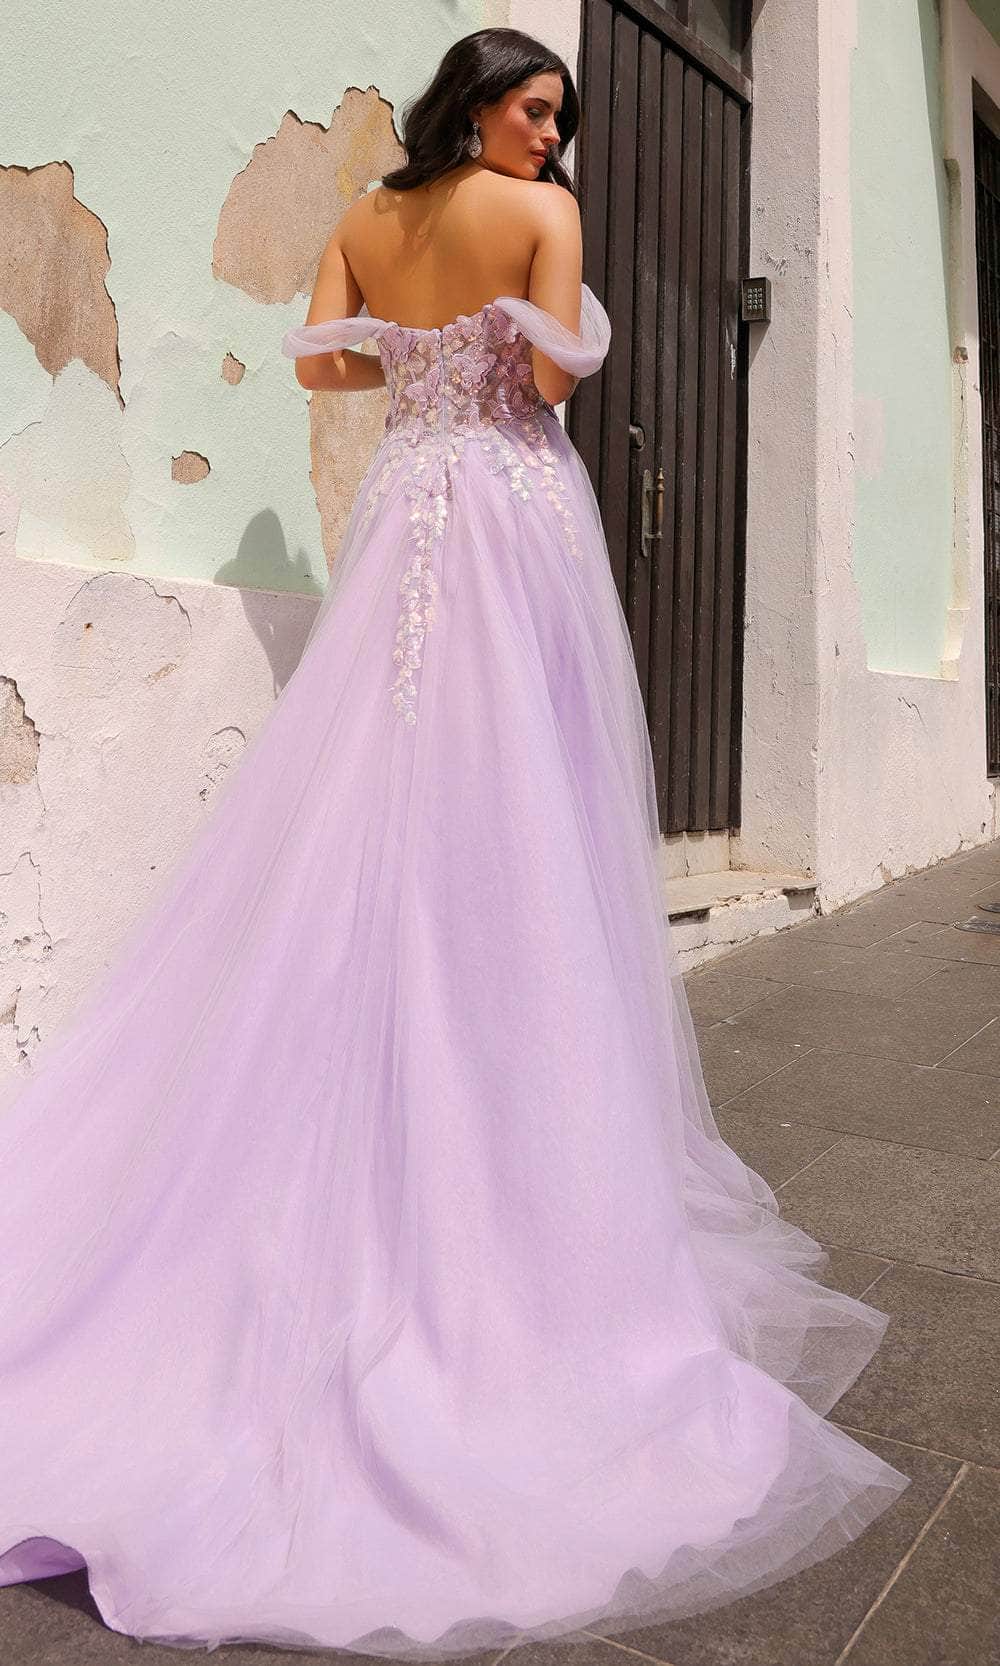 Nox Anabel J1324 - Sweetheart Embellished Gown Prom Gown 